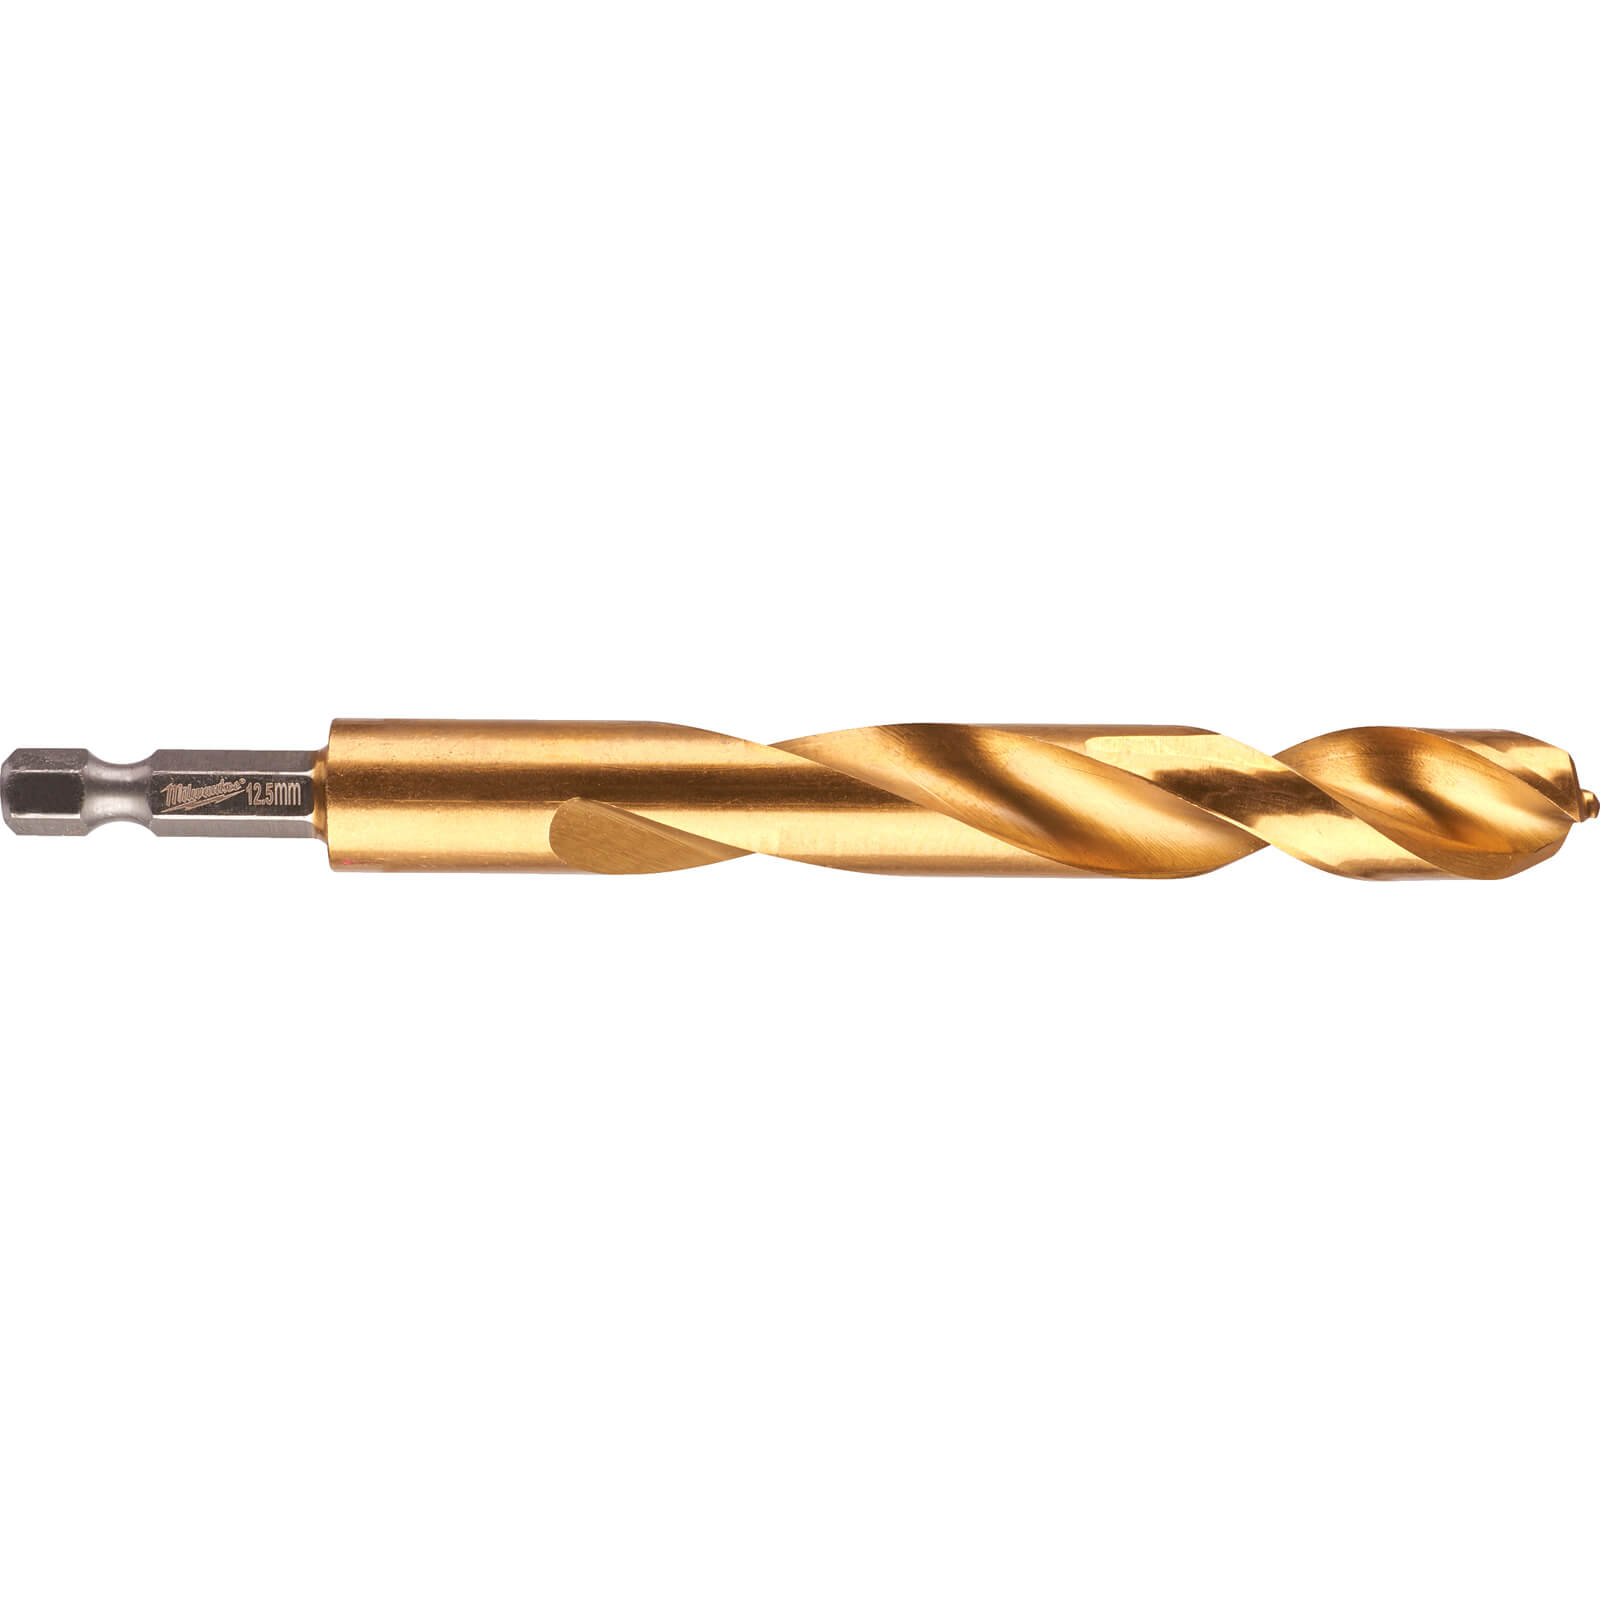 Image of Milwaukee HSS-G Shockwave Drill Bit 12.5mm Pack of 1